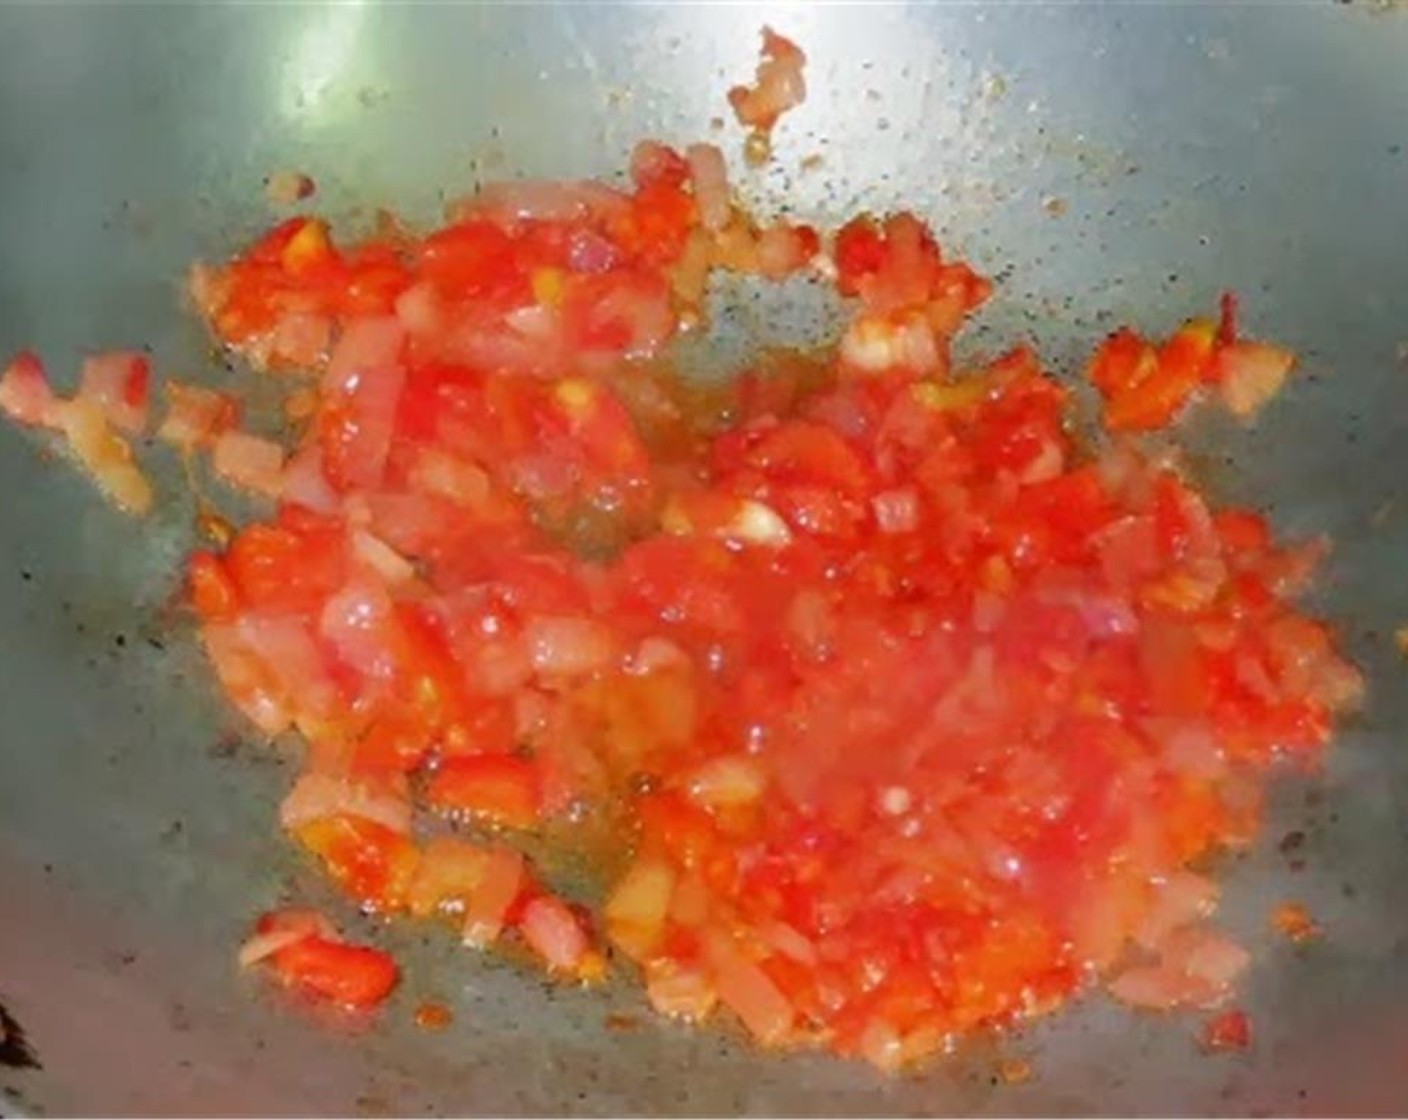 step 4 Add tomato and mix well. Keep stirring frequently or the mixture might burn.